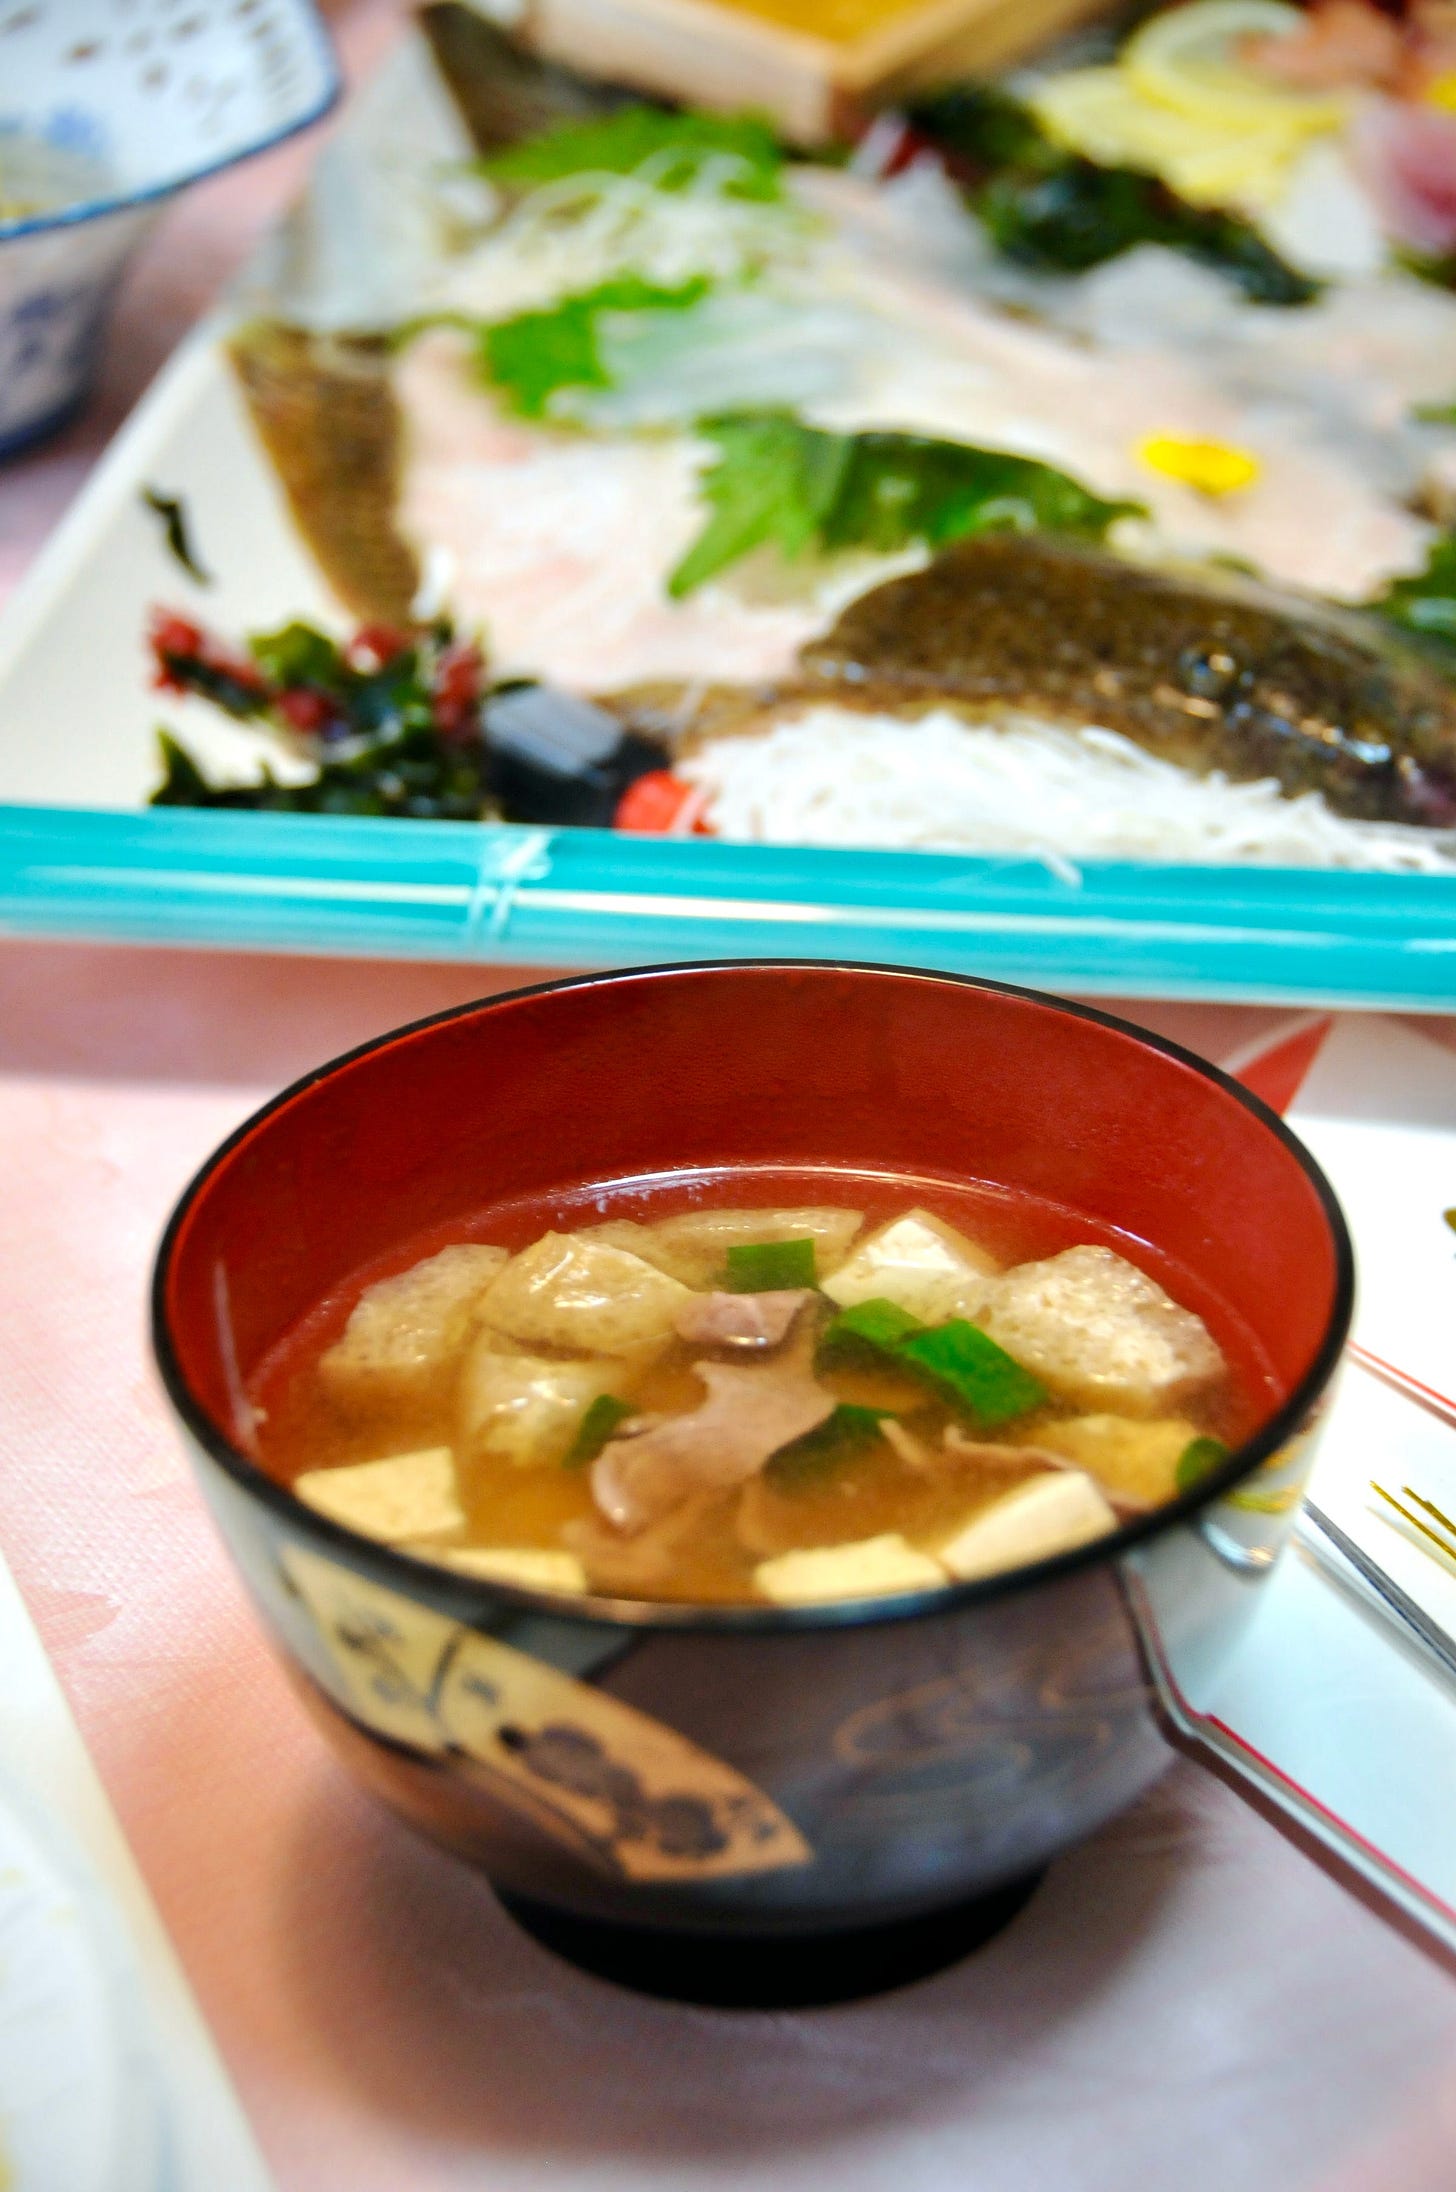 Miso Soup and Sashimi’d Fish, Photo by Author